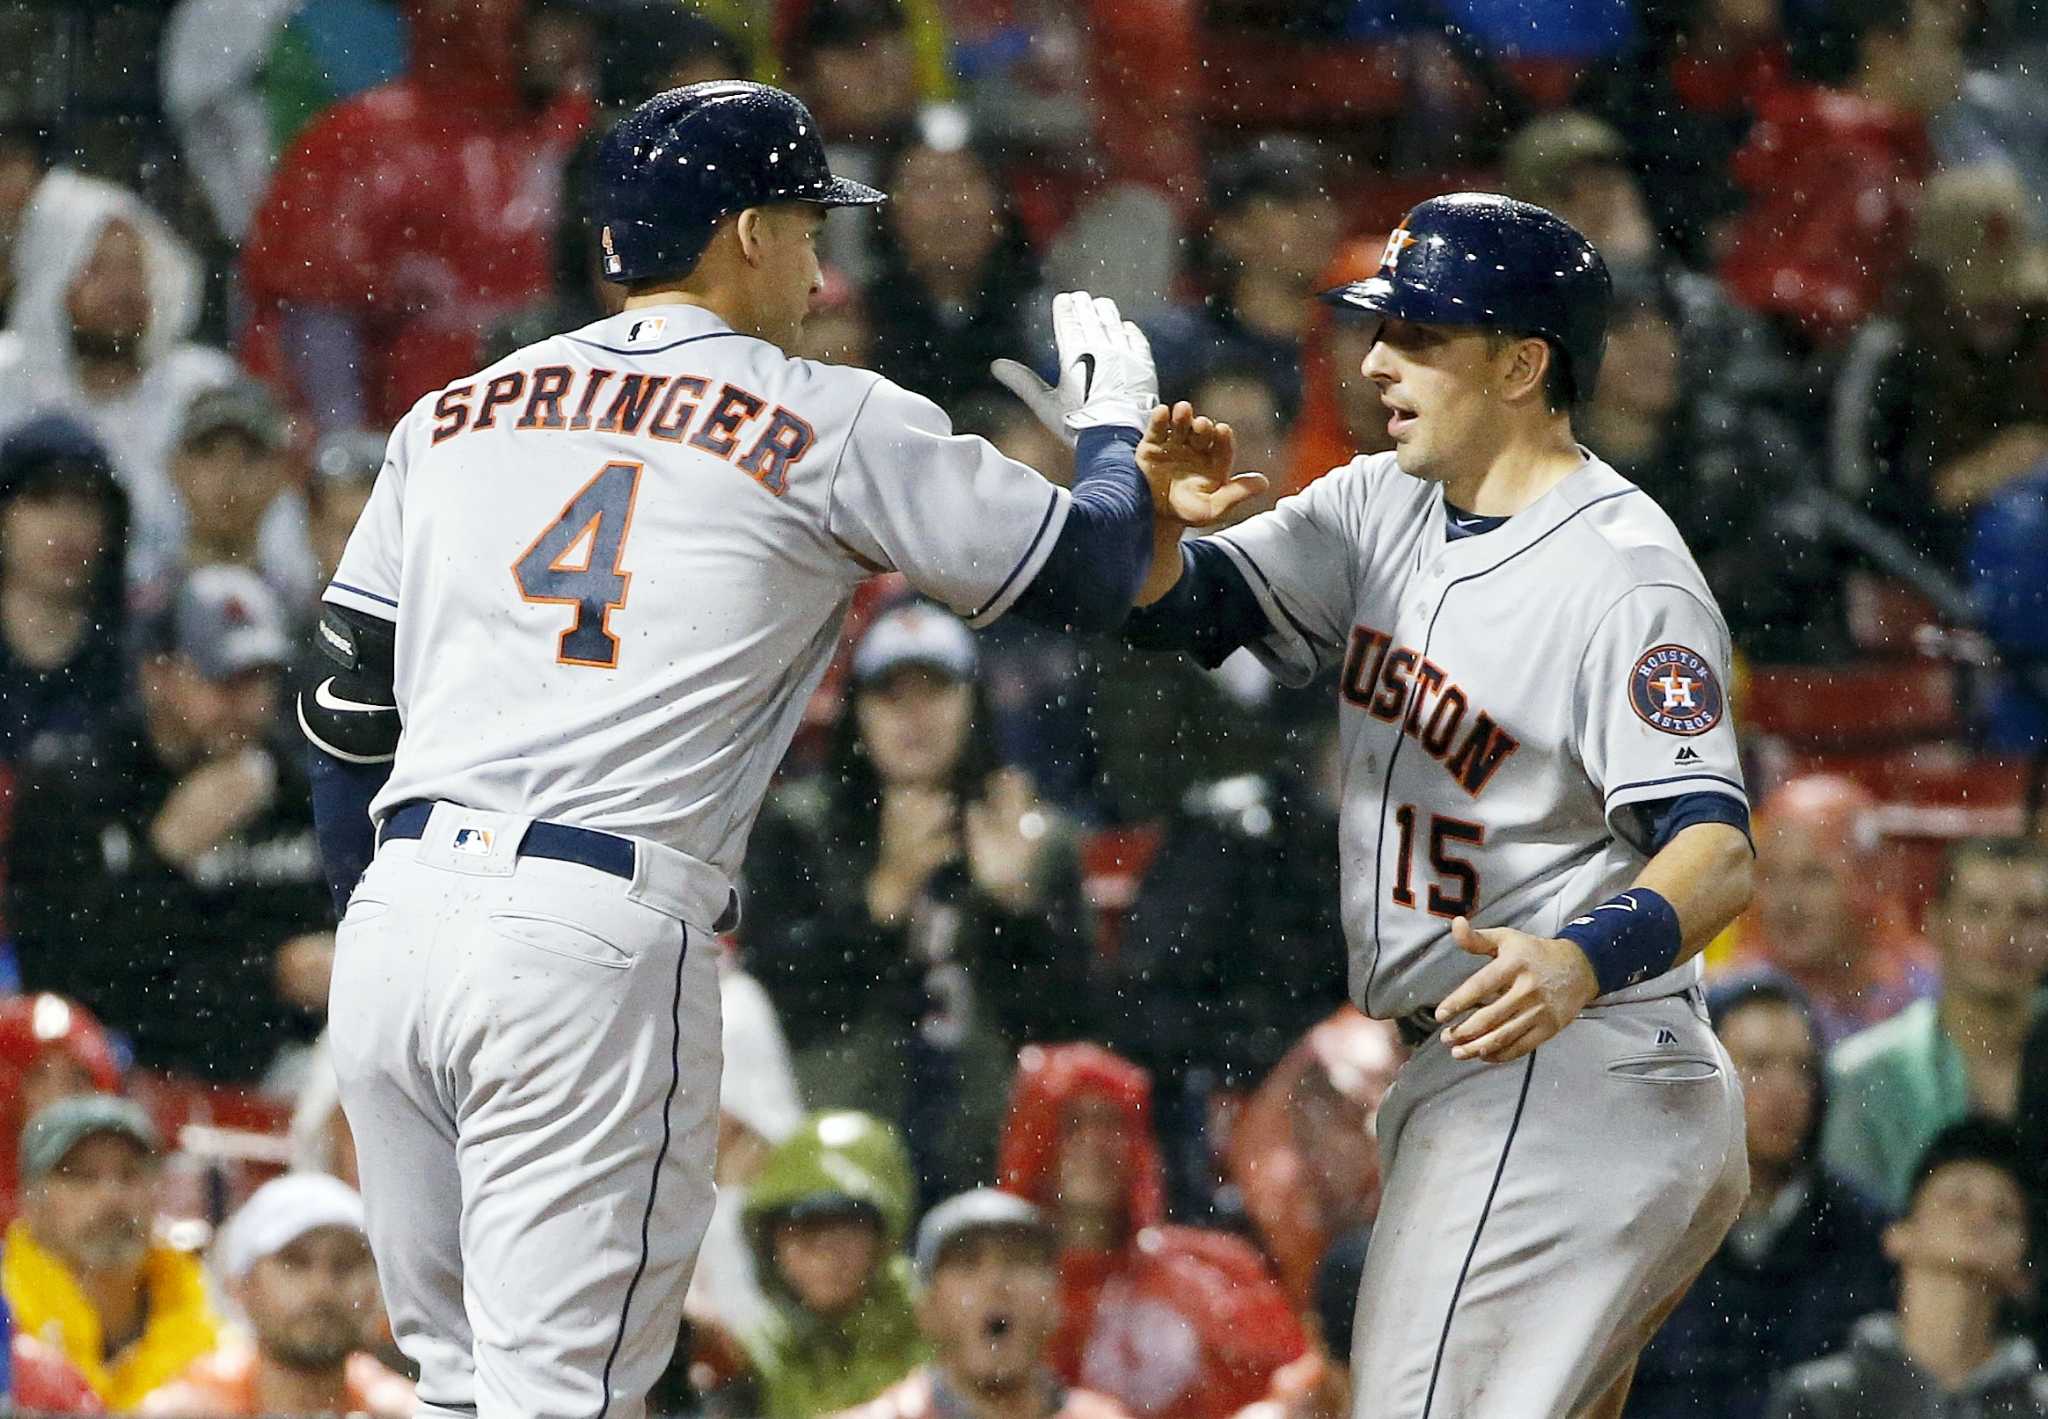 Former UConn star George Springer happy to be closer to home